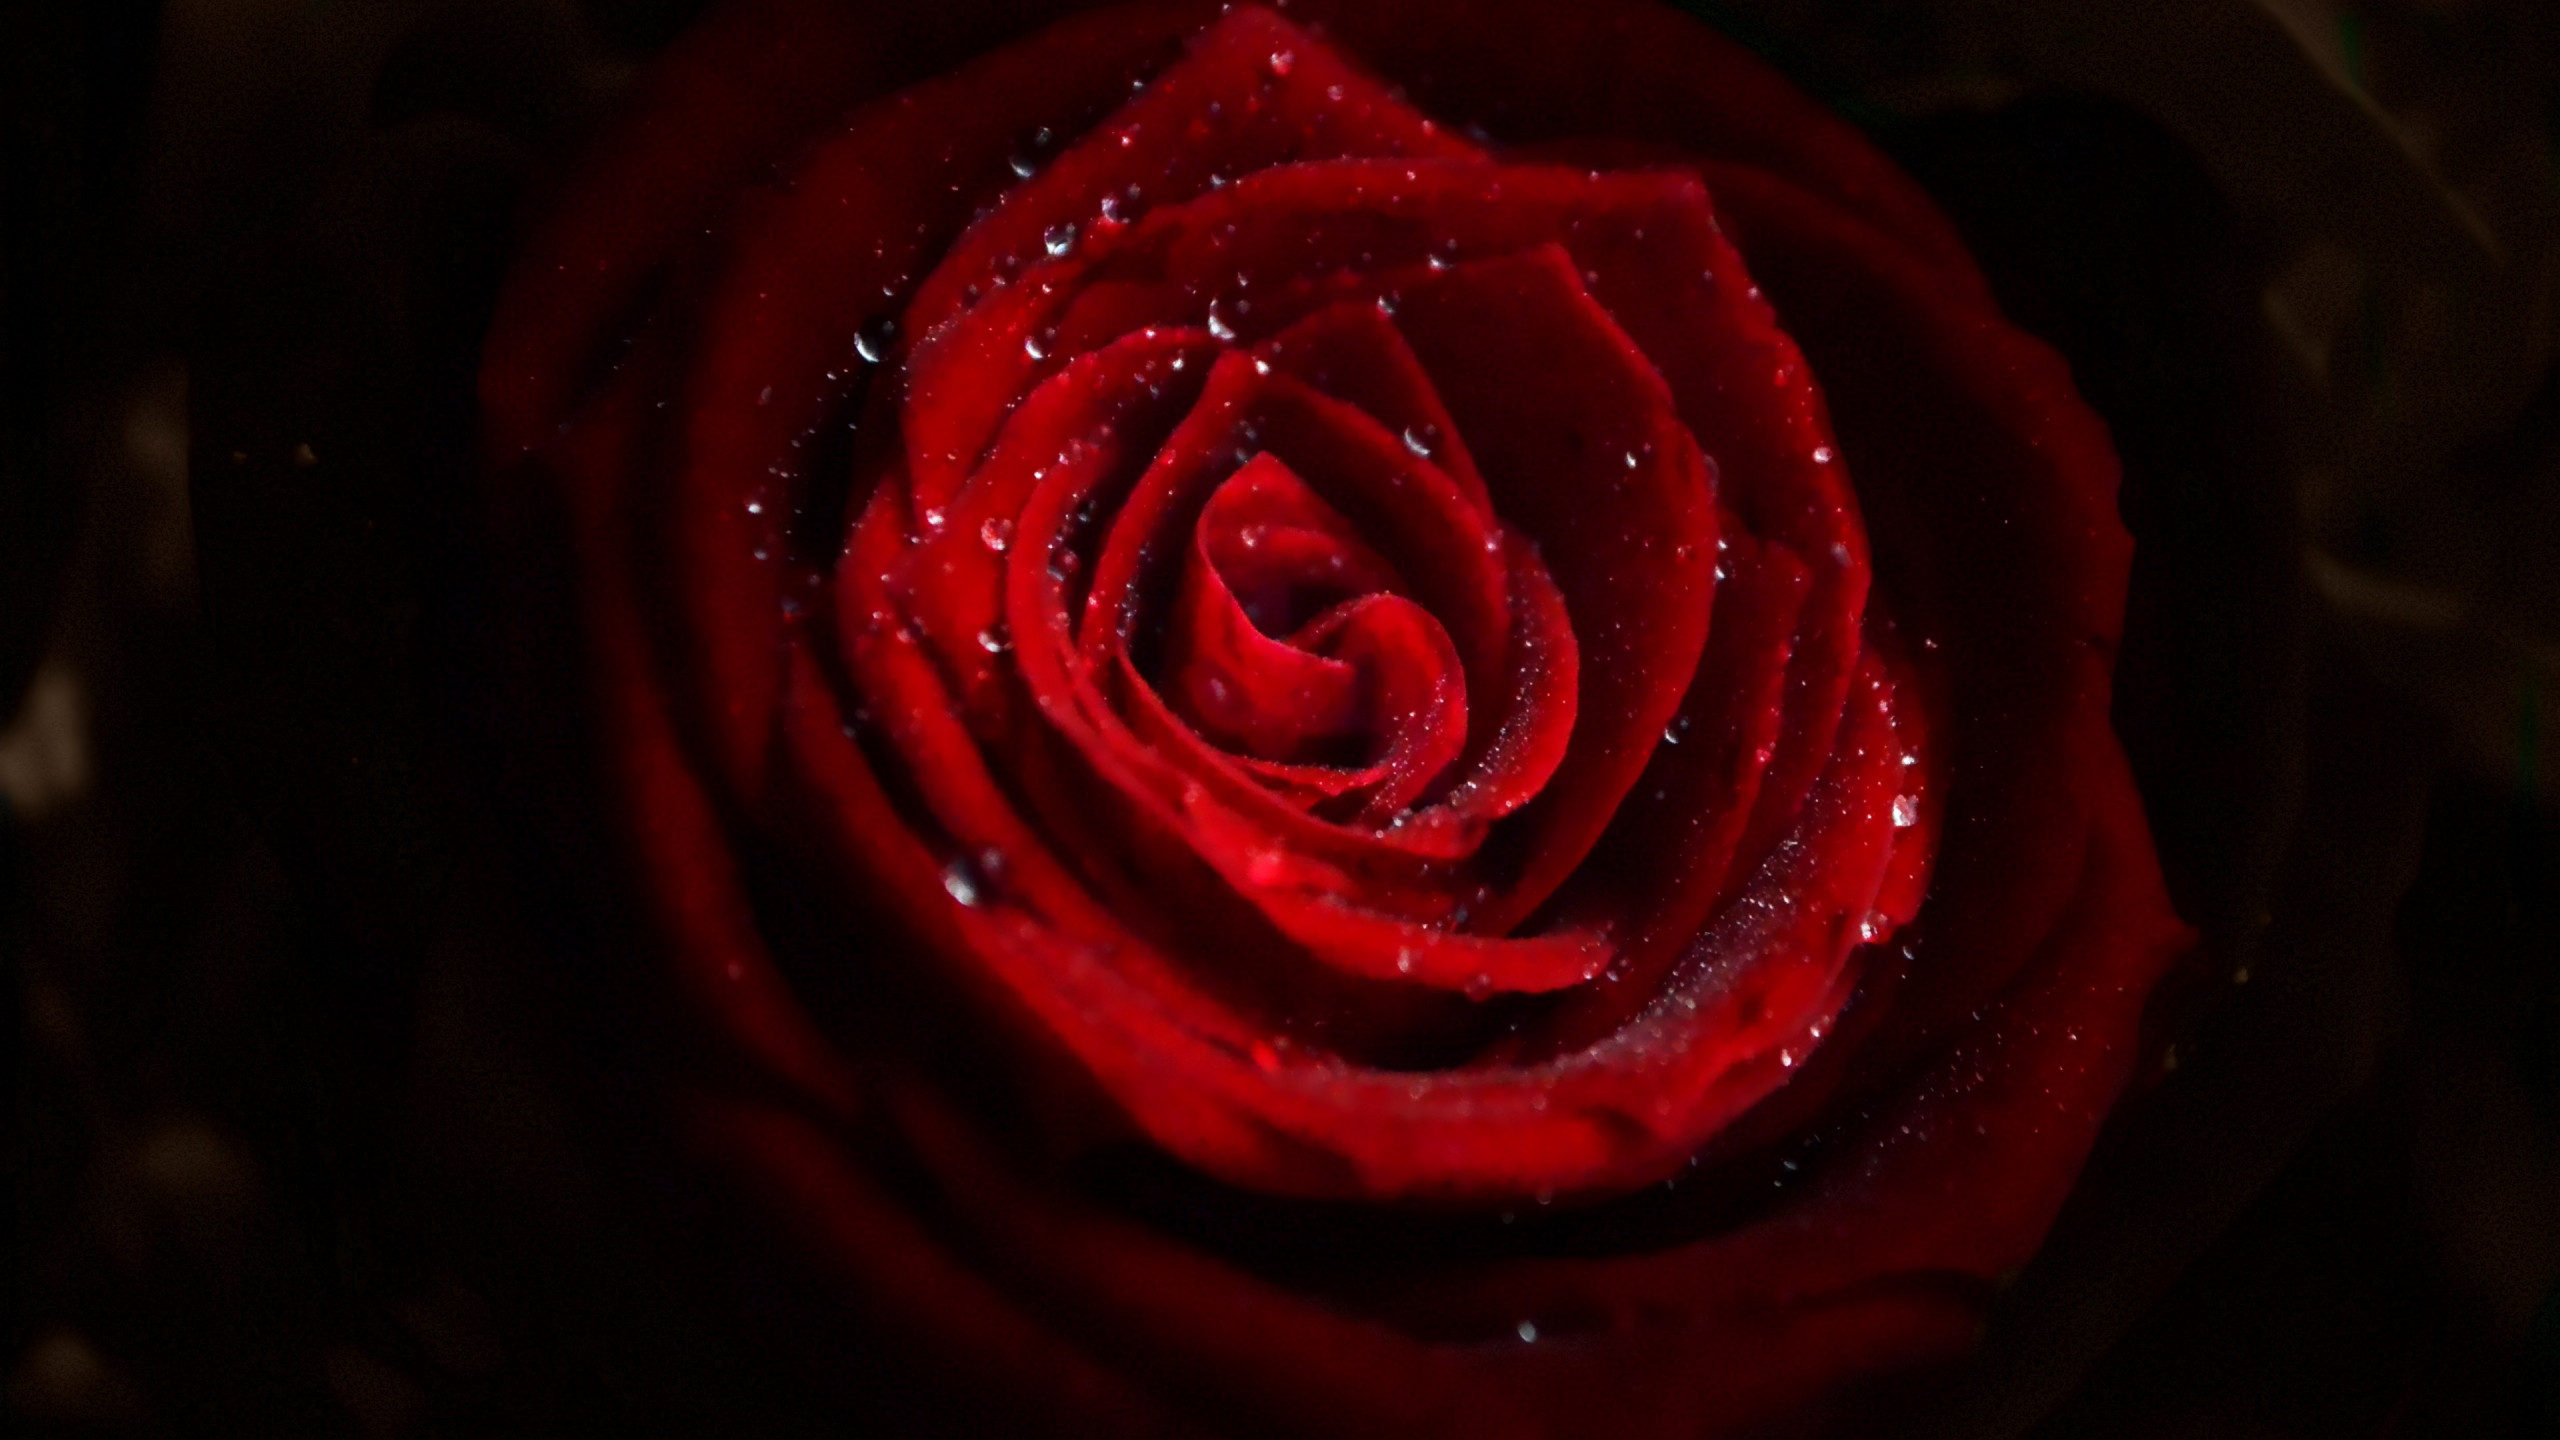 Water drops on red rose wallpaper 2560x1440